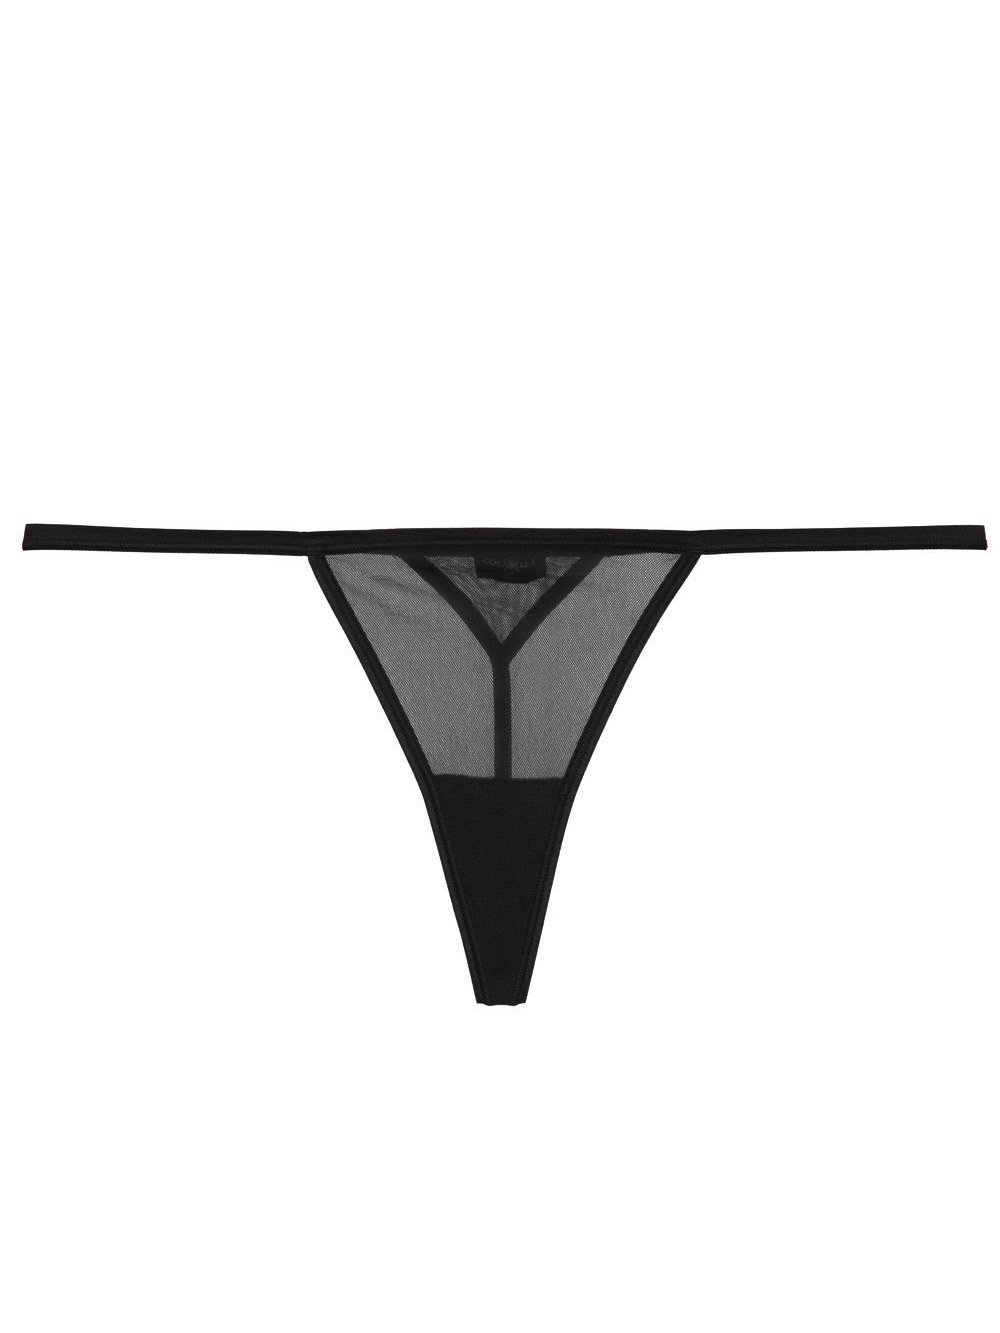 Cosabella G-STRINGS O/S (ONE SIZE) / BLACK Cosabella CONFIDENCE Sexy G Strings Panties